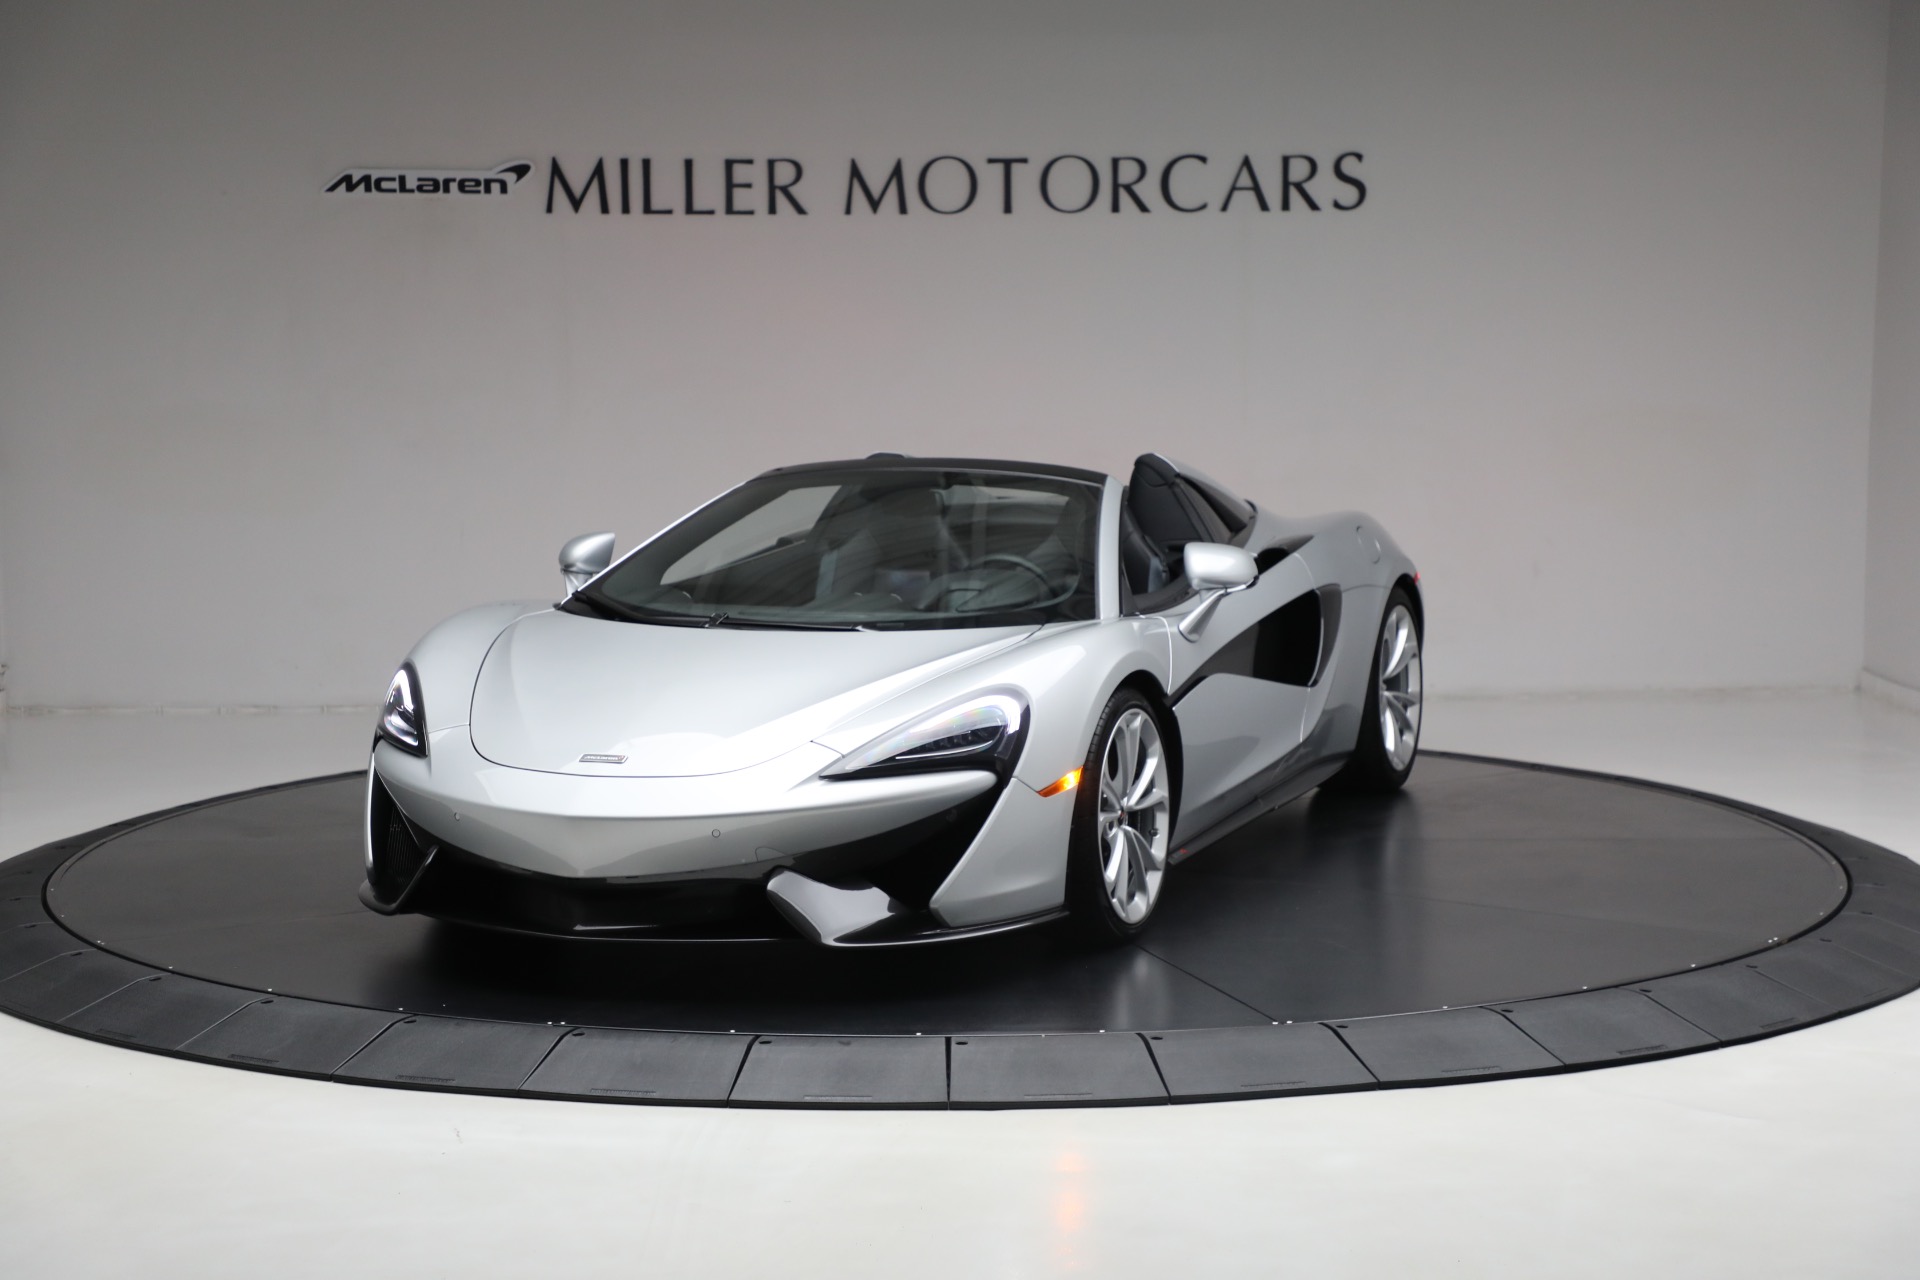 Used 2018 McLaren 570S Spider for sale $173,900 at Rolls-Royce Motor Cars Greenwich in Greenwich CT 06830 1